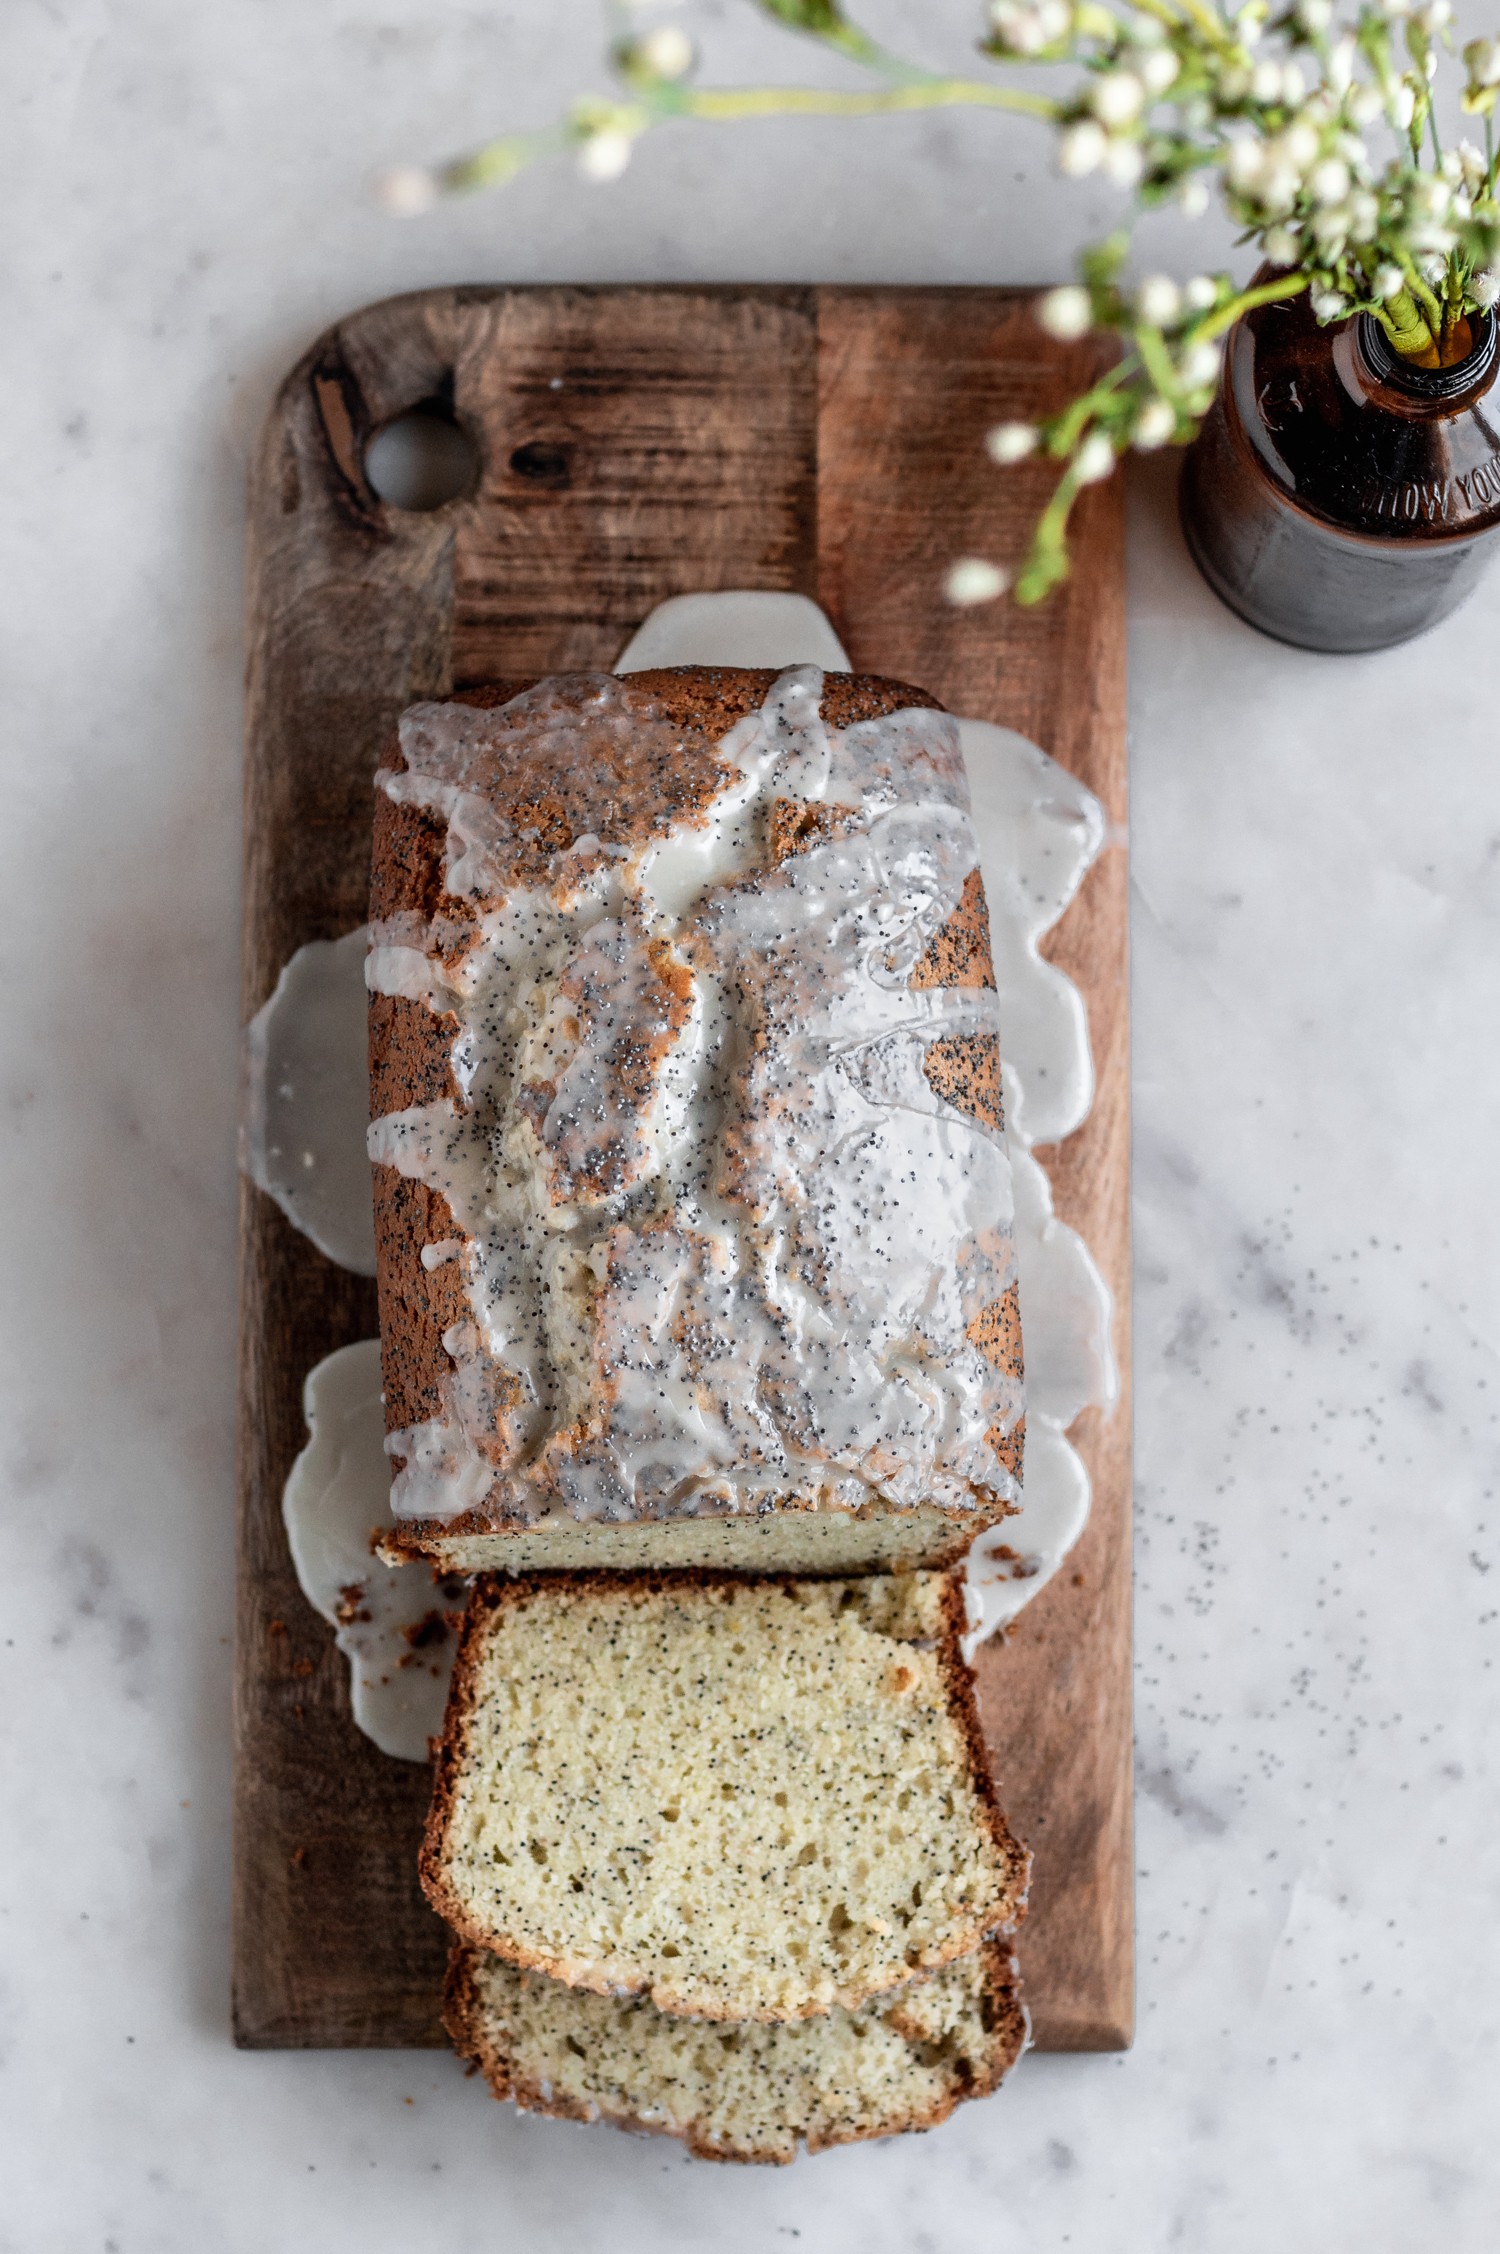 Poppy seed bread that only needs 10 ingredients and 10 minutes!